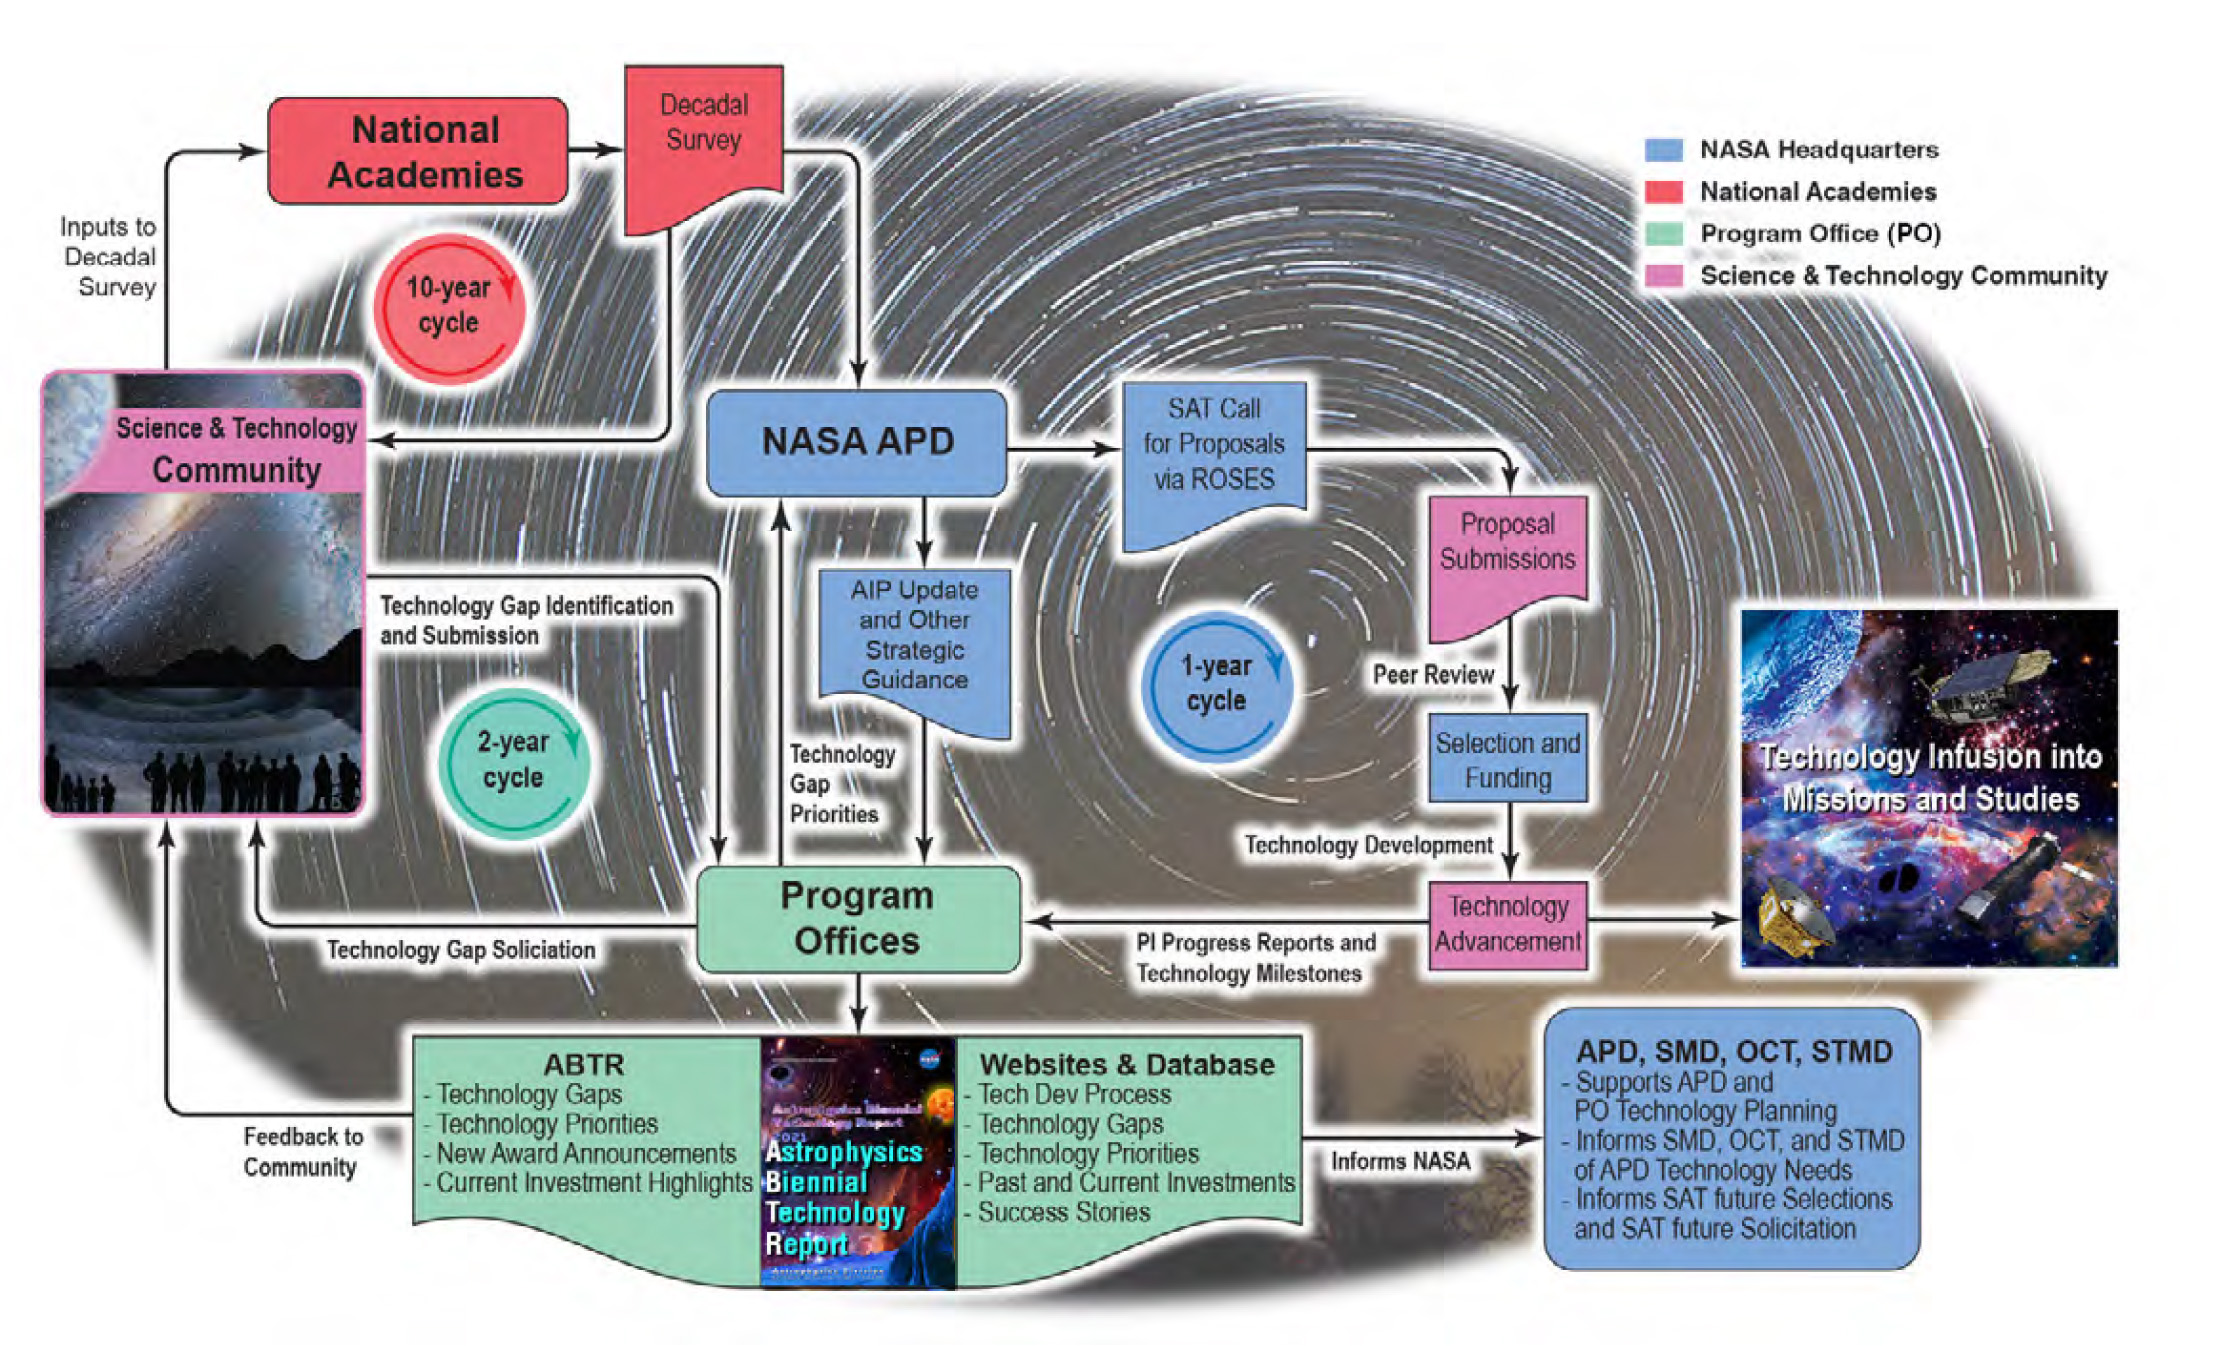 The Astrophysics Strategic Technology Development Process Matures and Enables Infusion of Key Technologies into Astrophysics Missions and Beyond